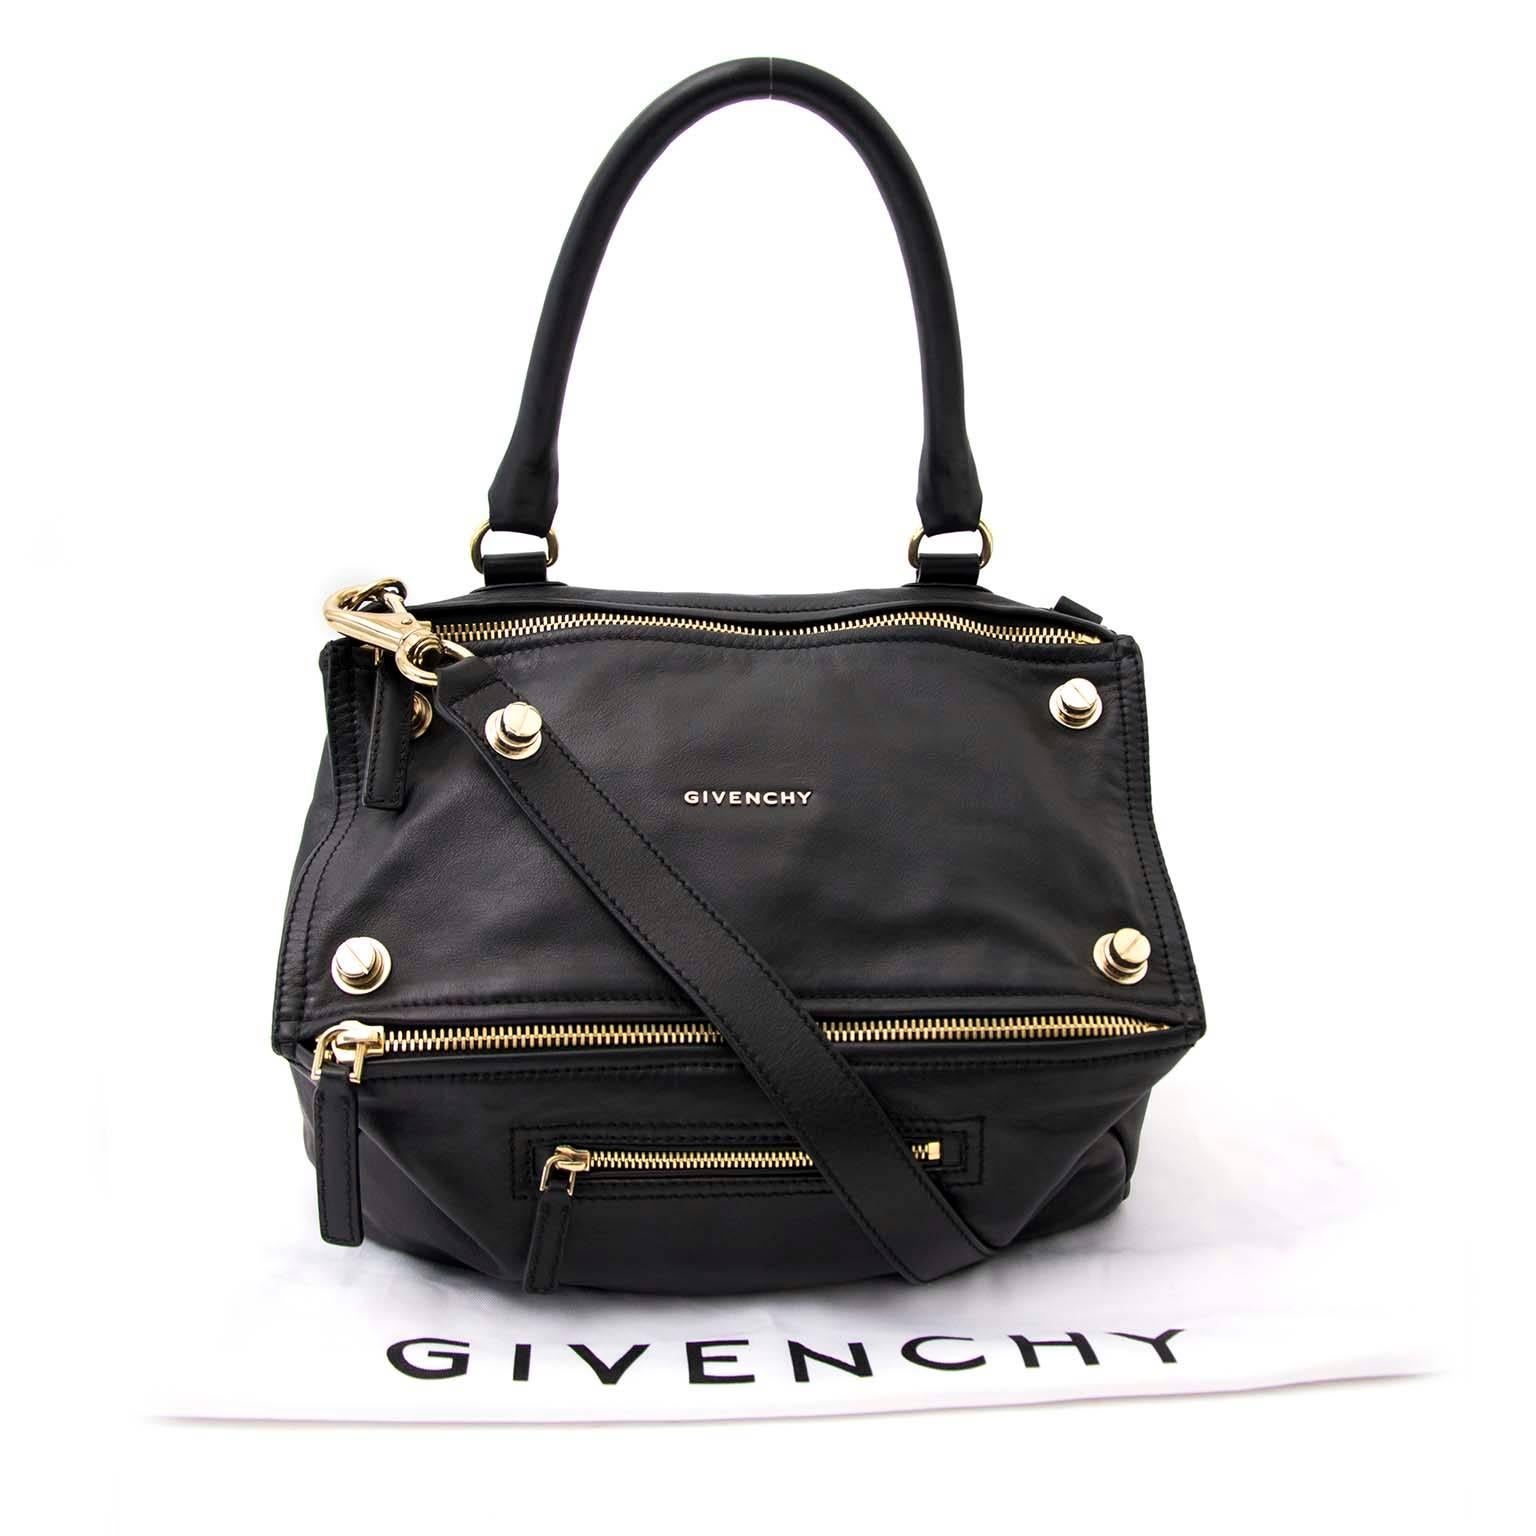 Excellent Preloved Condition

Estimated retail price €1550,-

Givenchy Black Pandora Medium Leather Satchel Bag

Modern and boxy Givenchy's Pandora shoulder bag crafted in Italy from soft leather. Oversized zips and gold-toned hardware enhance its